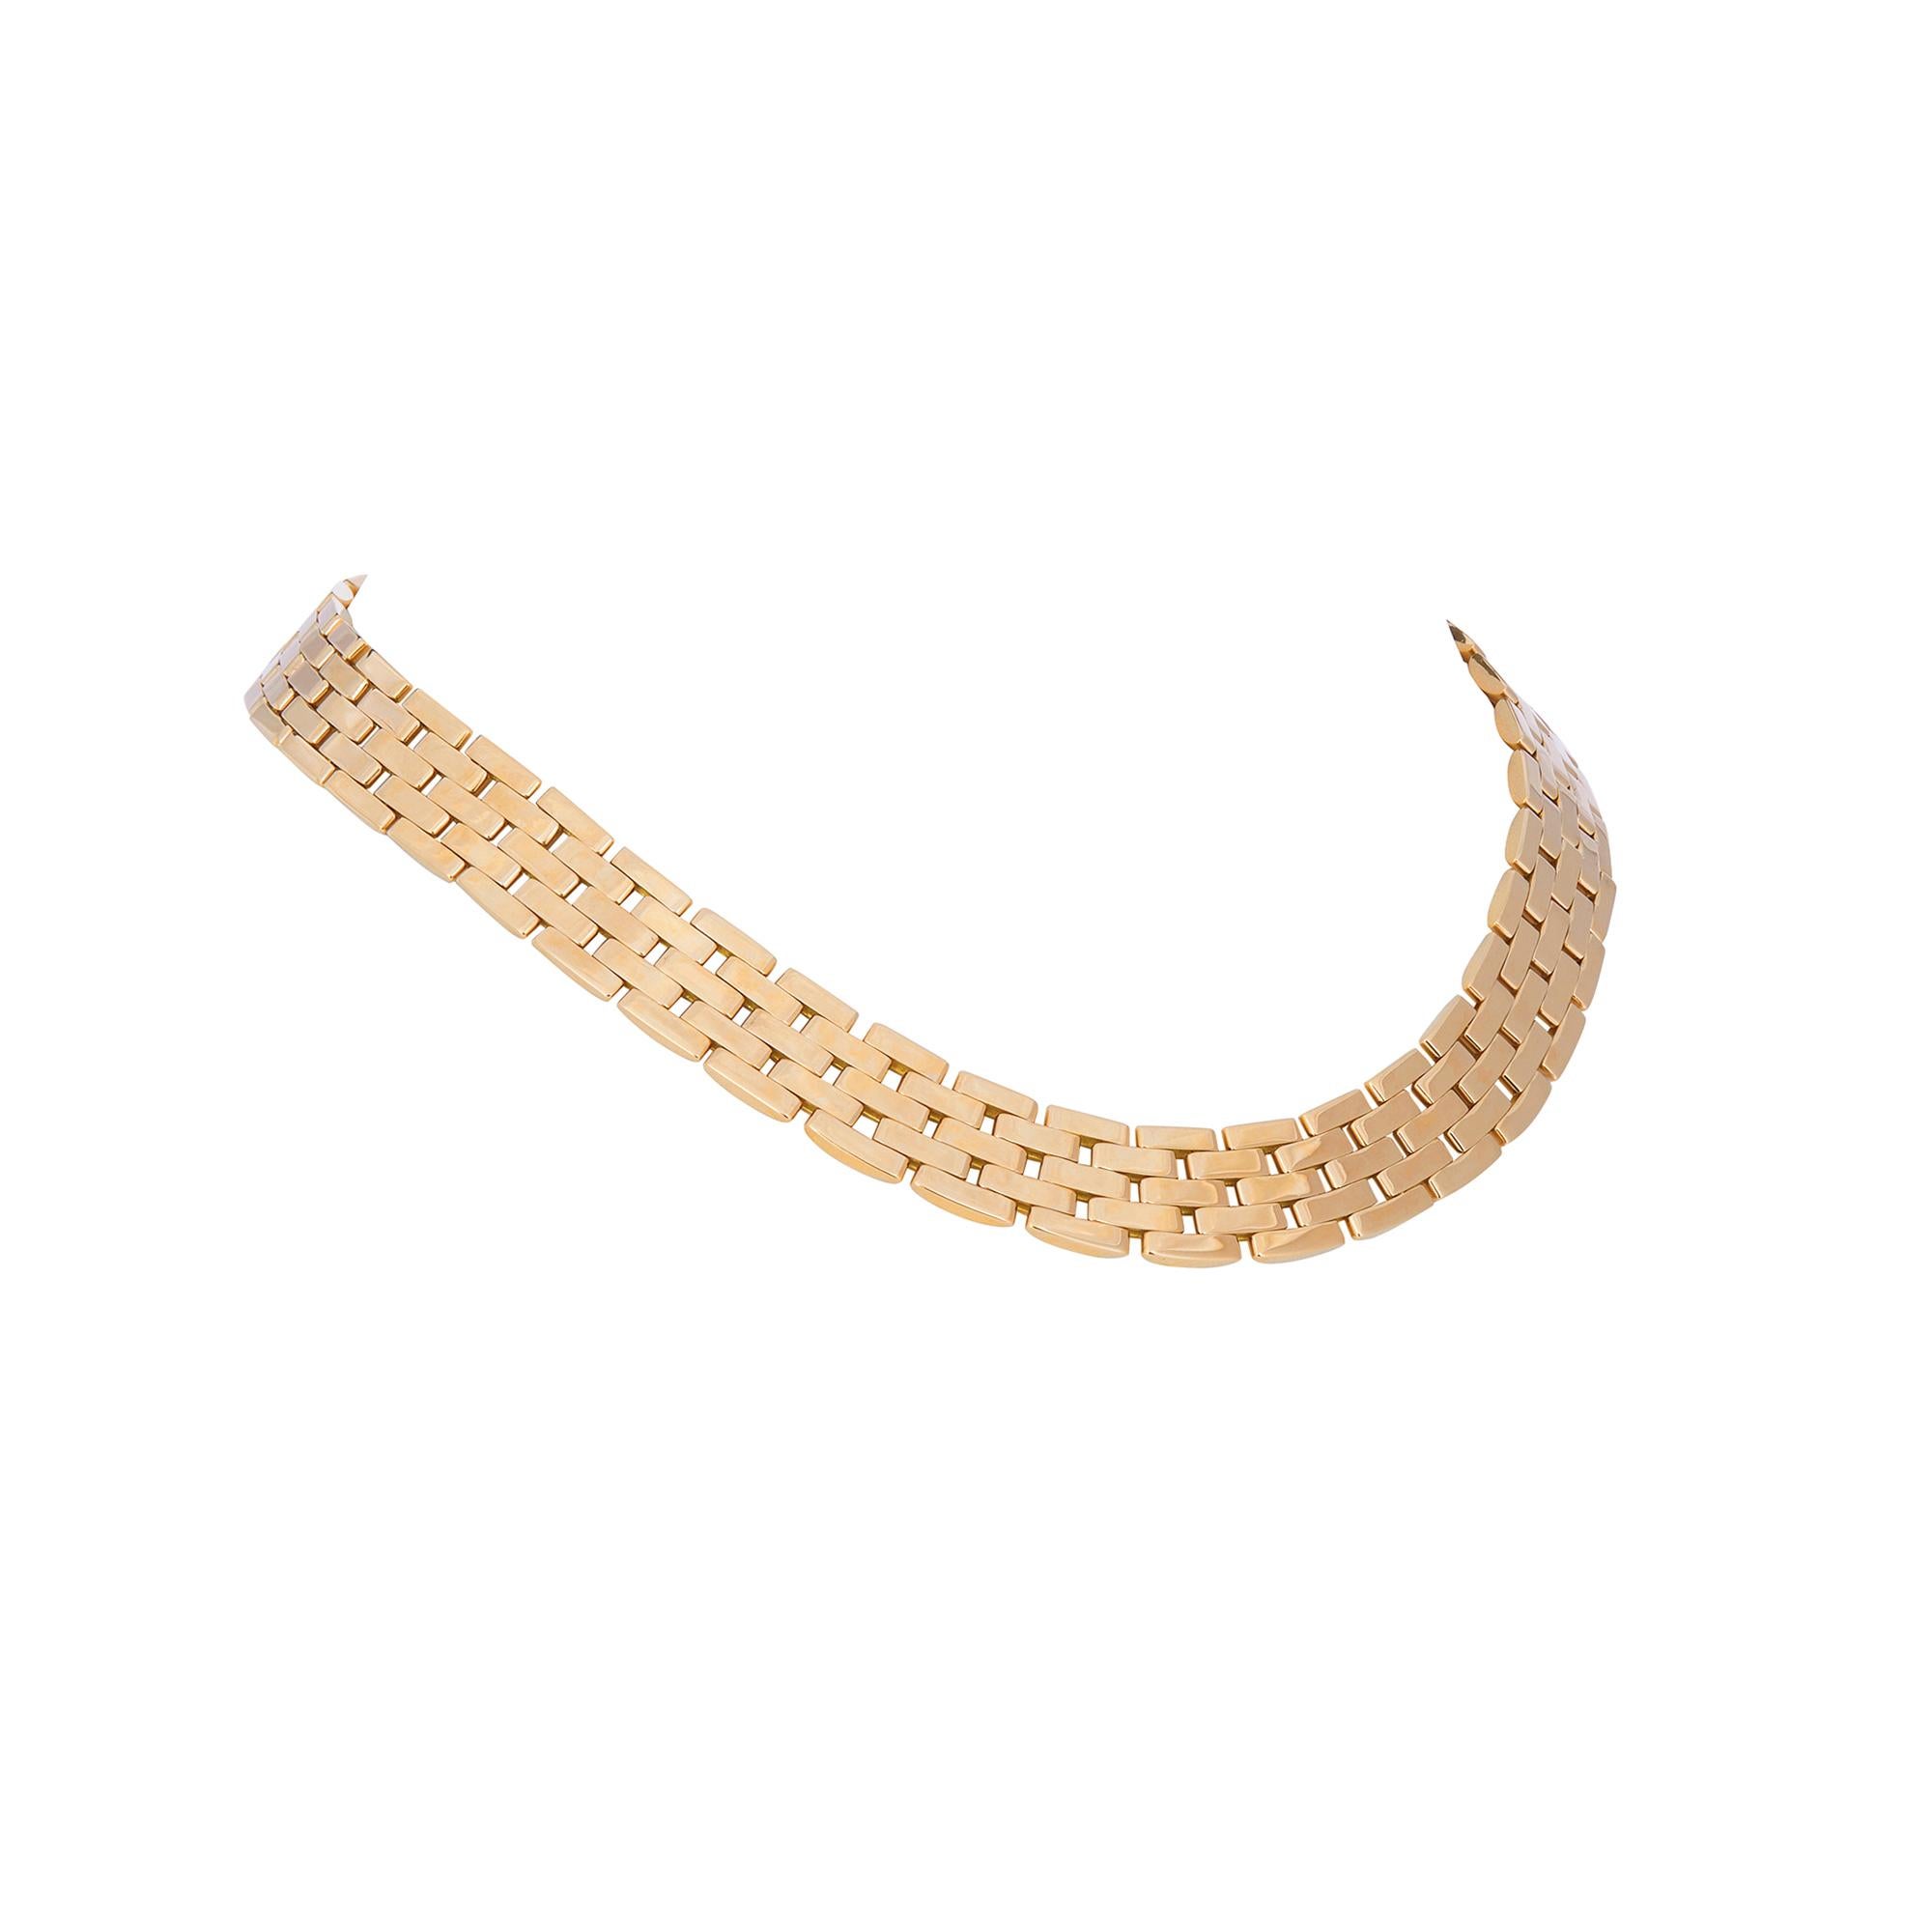 Authentic Cartier Maillon Panthère necklace crafted in 18 karat yellow gold.  Featuring five rows of high polished gold links in the icon Panthère de Cartier pattern, the necklace measures 16 inches in length and 1/2 inch wide.  Signed Cartier, 750,